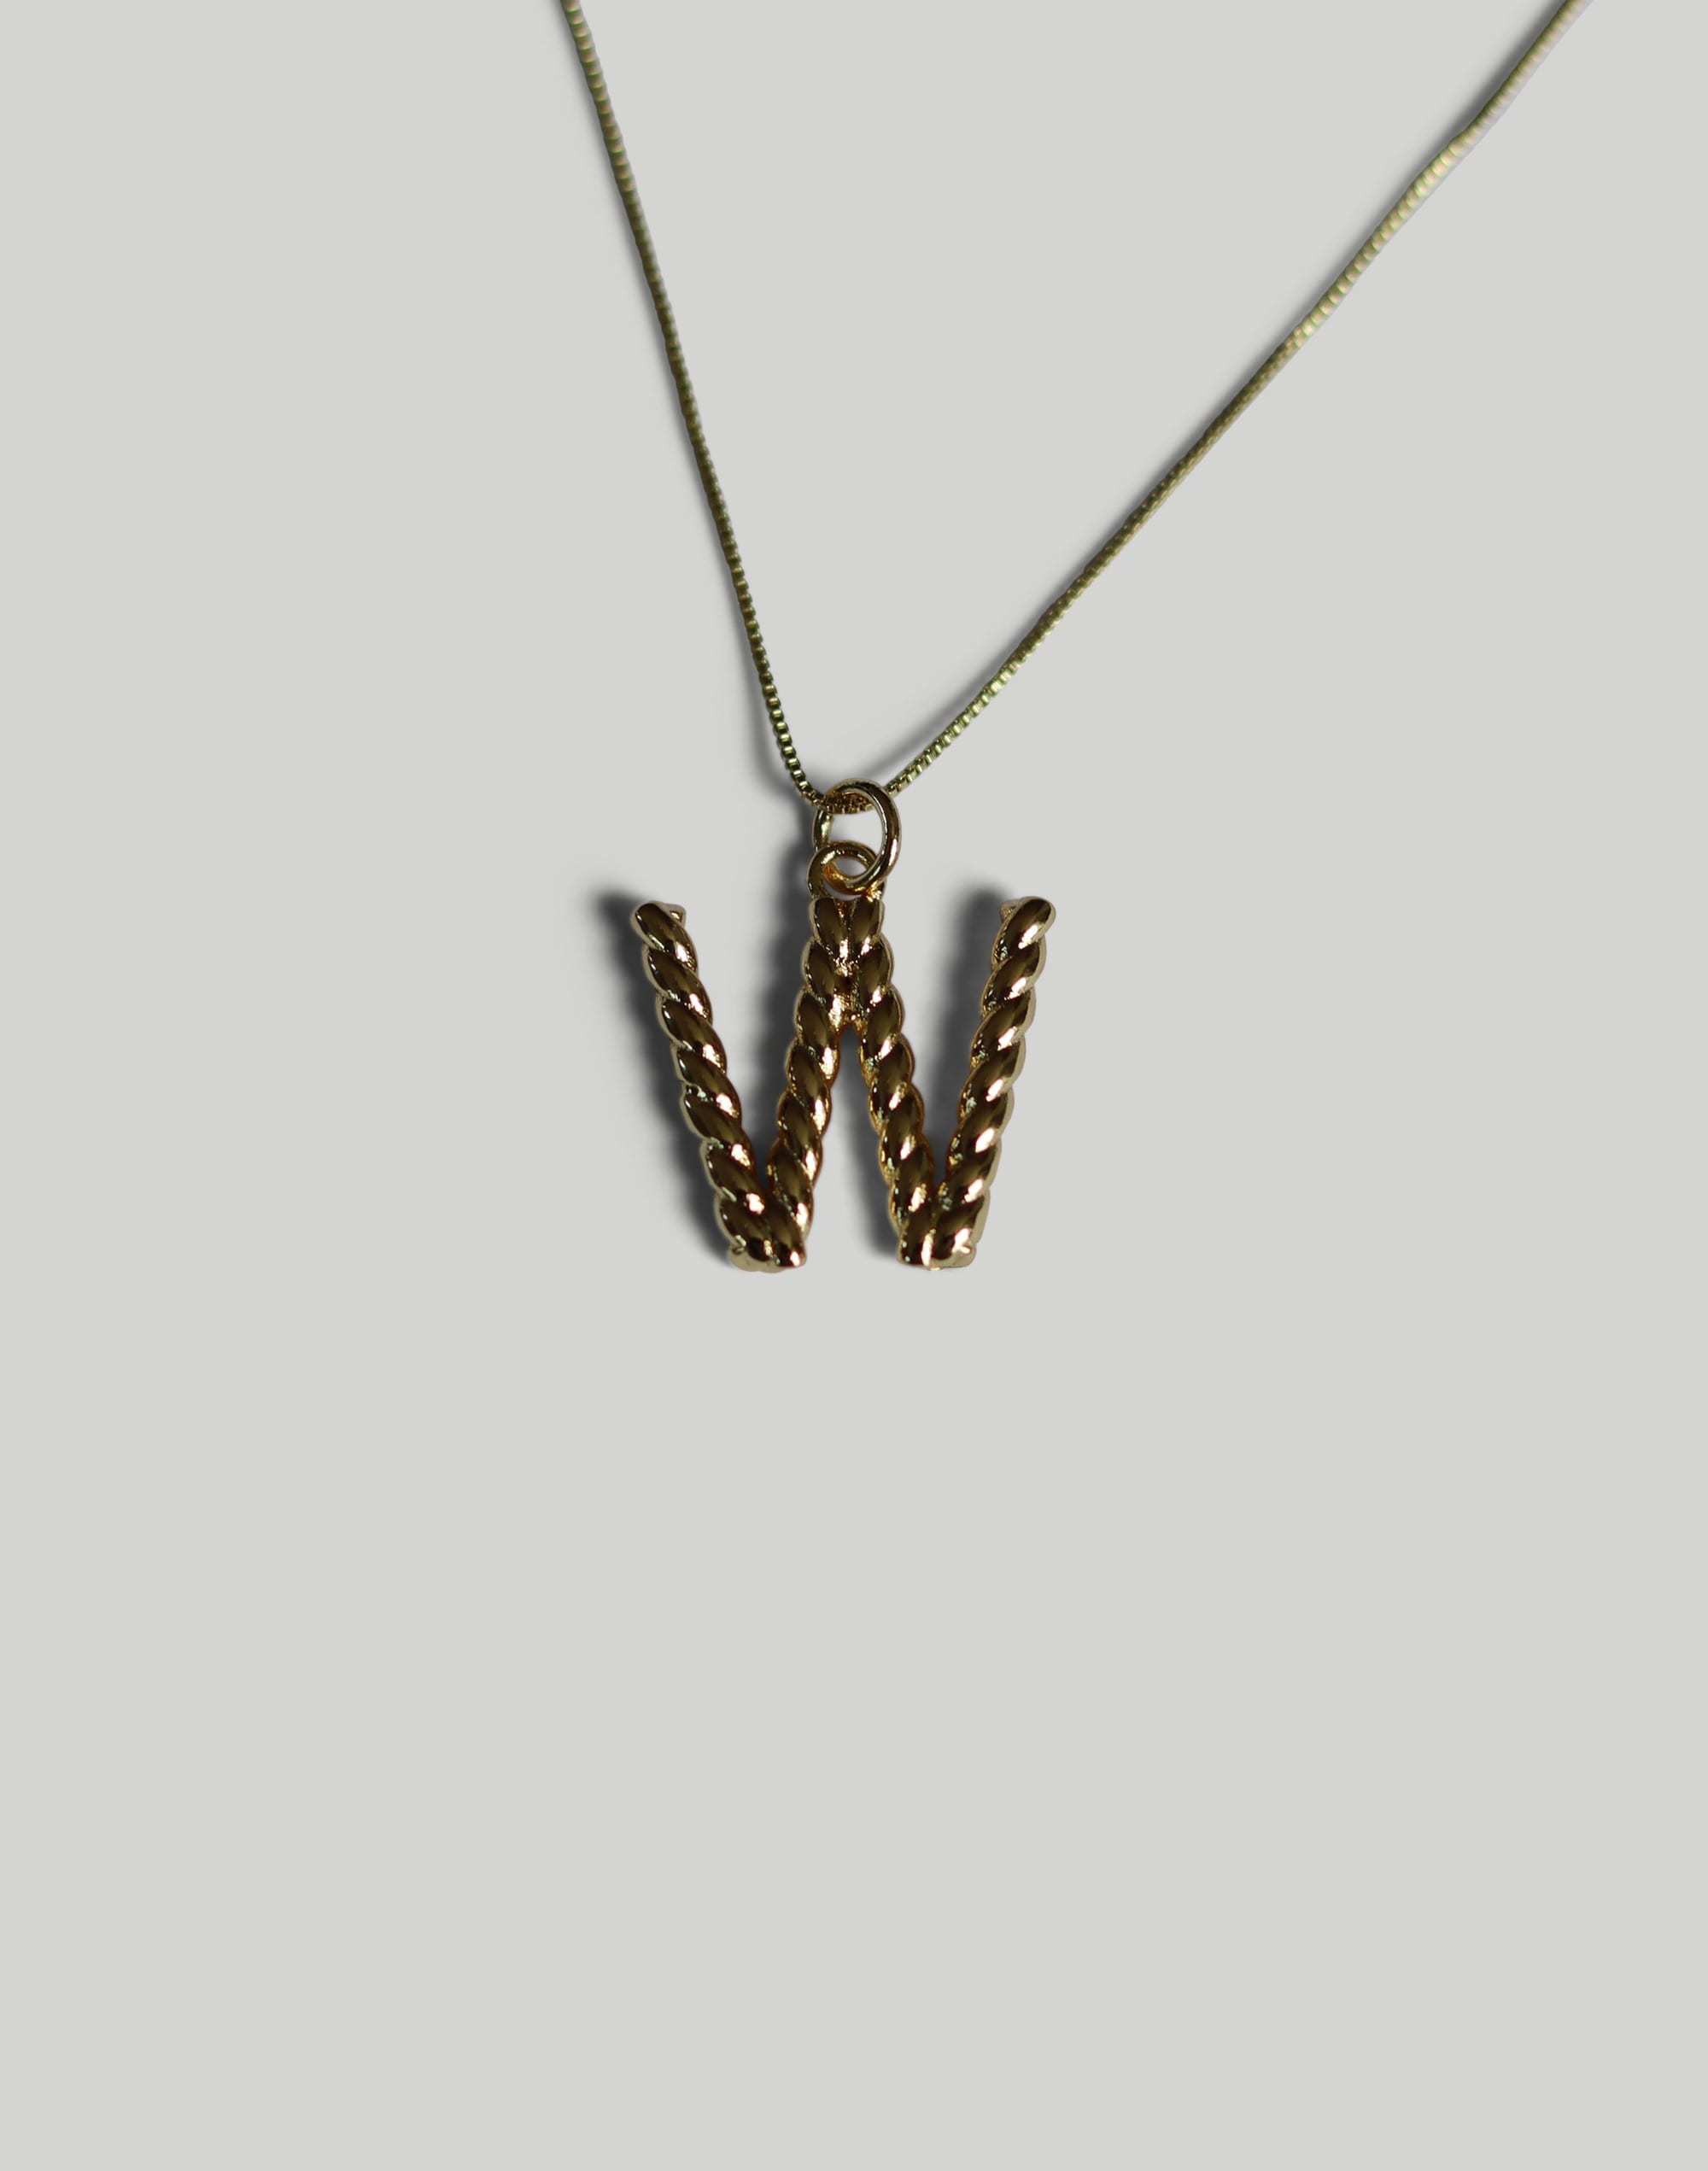 Abcrete & Co. The Rope Initial Necklace